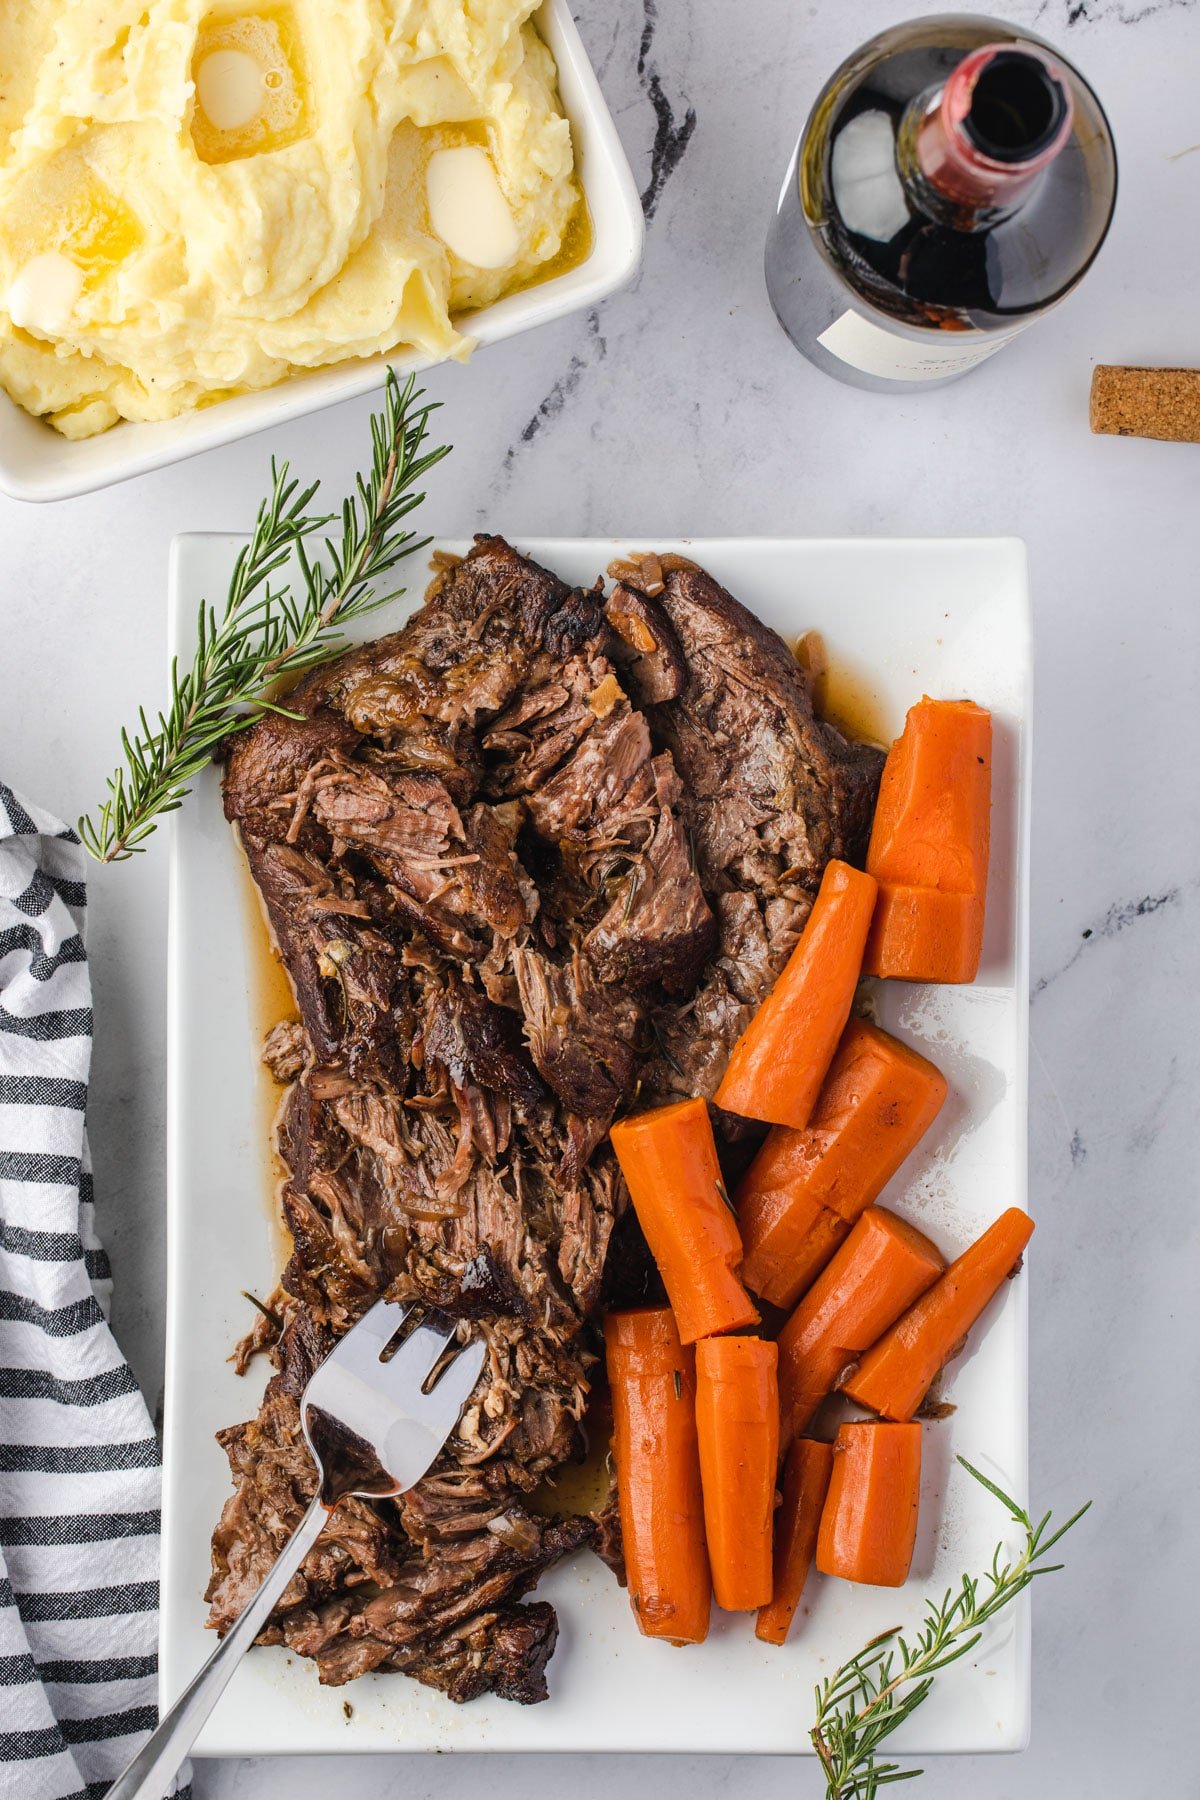 Shredded tender pot roast on a rectangular tray with roasted carrots and a bottle of red wine. and mashed potatoes in corners.